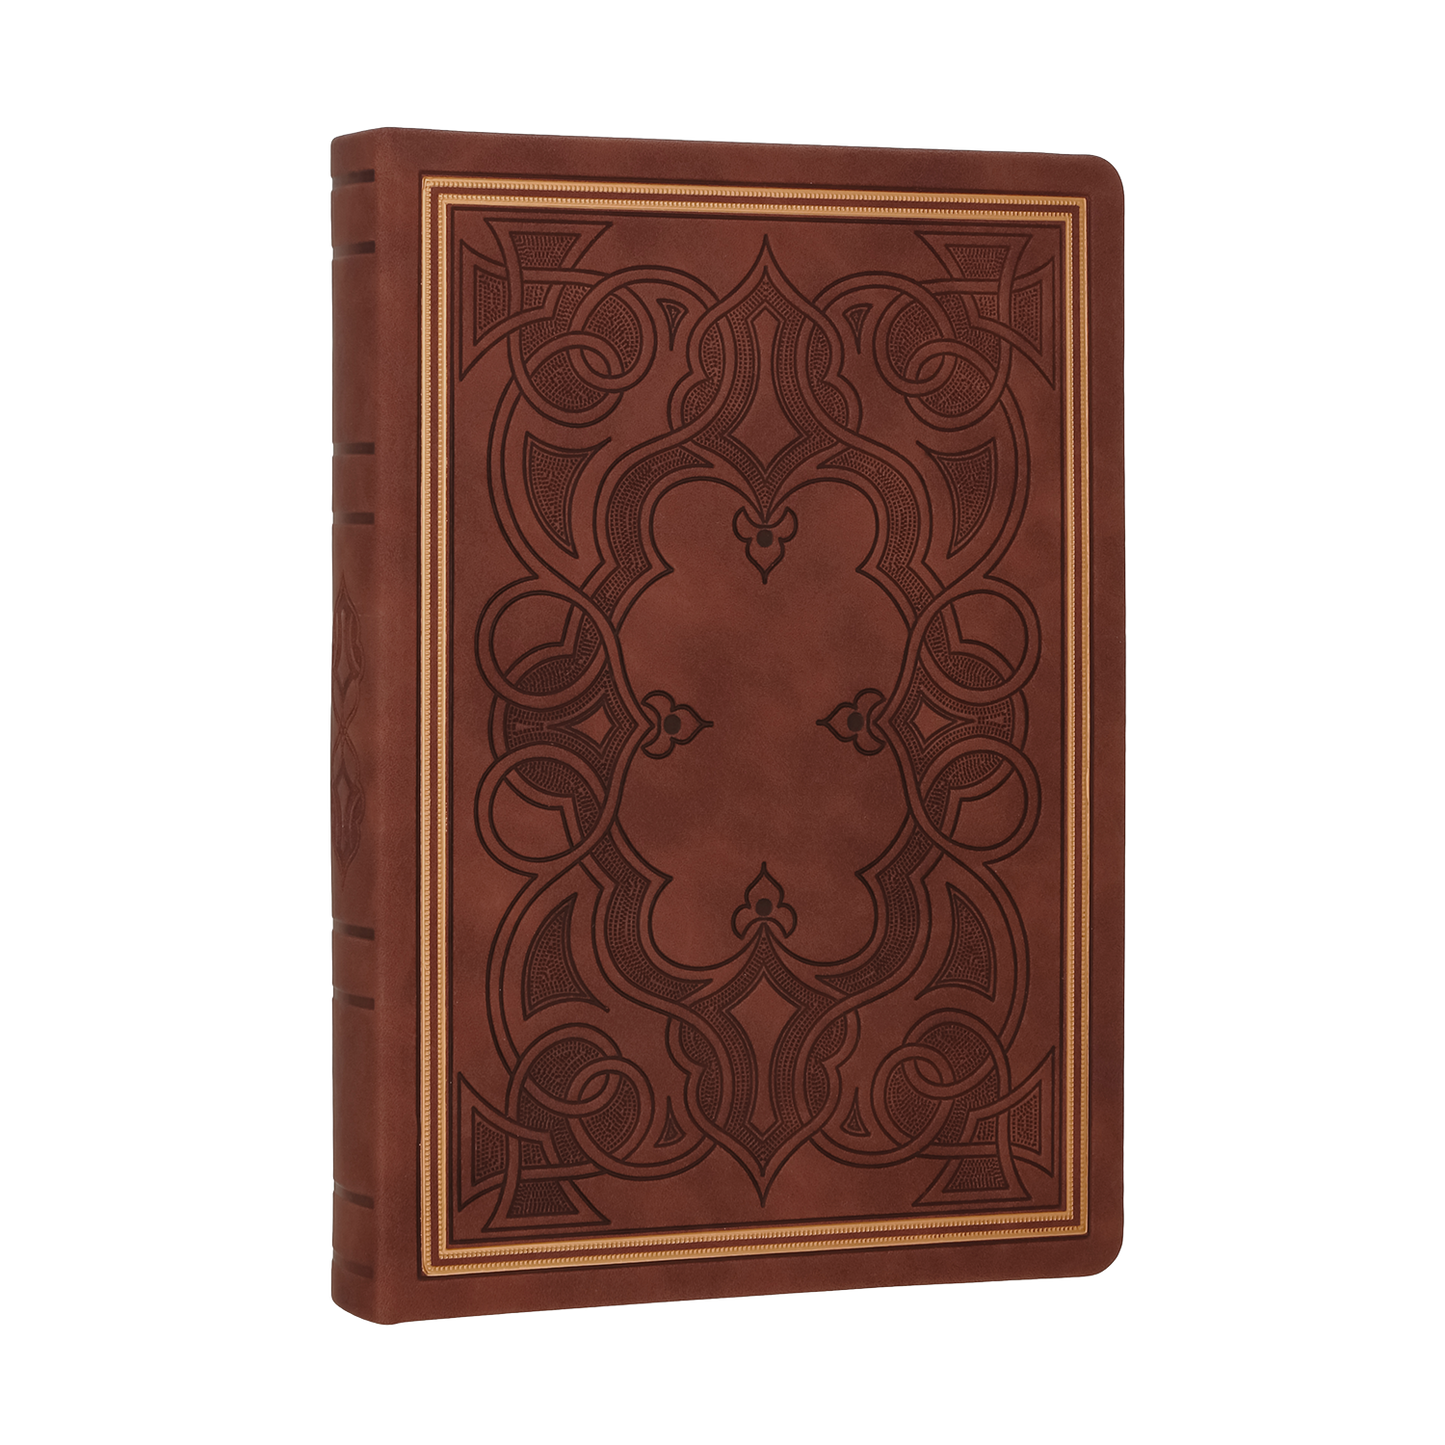 Victoria's Journals Vintage Style Diary – Daily Affirmations or a Prayer Journal 320p. (Chocolate Brown)